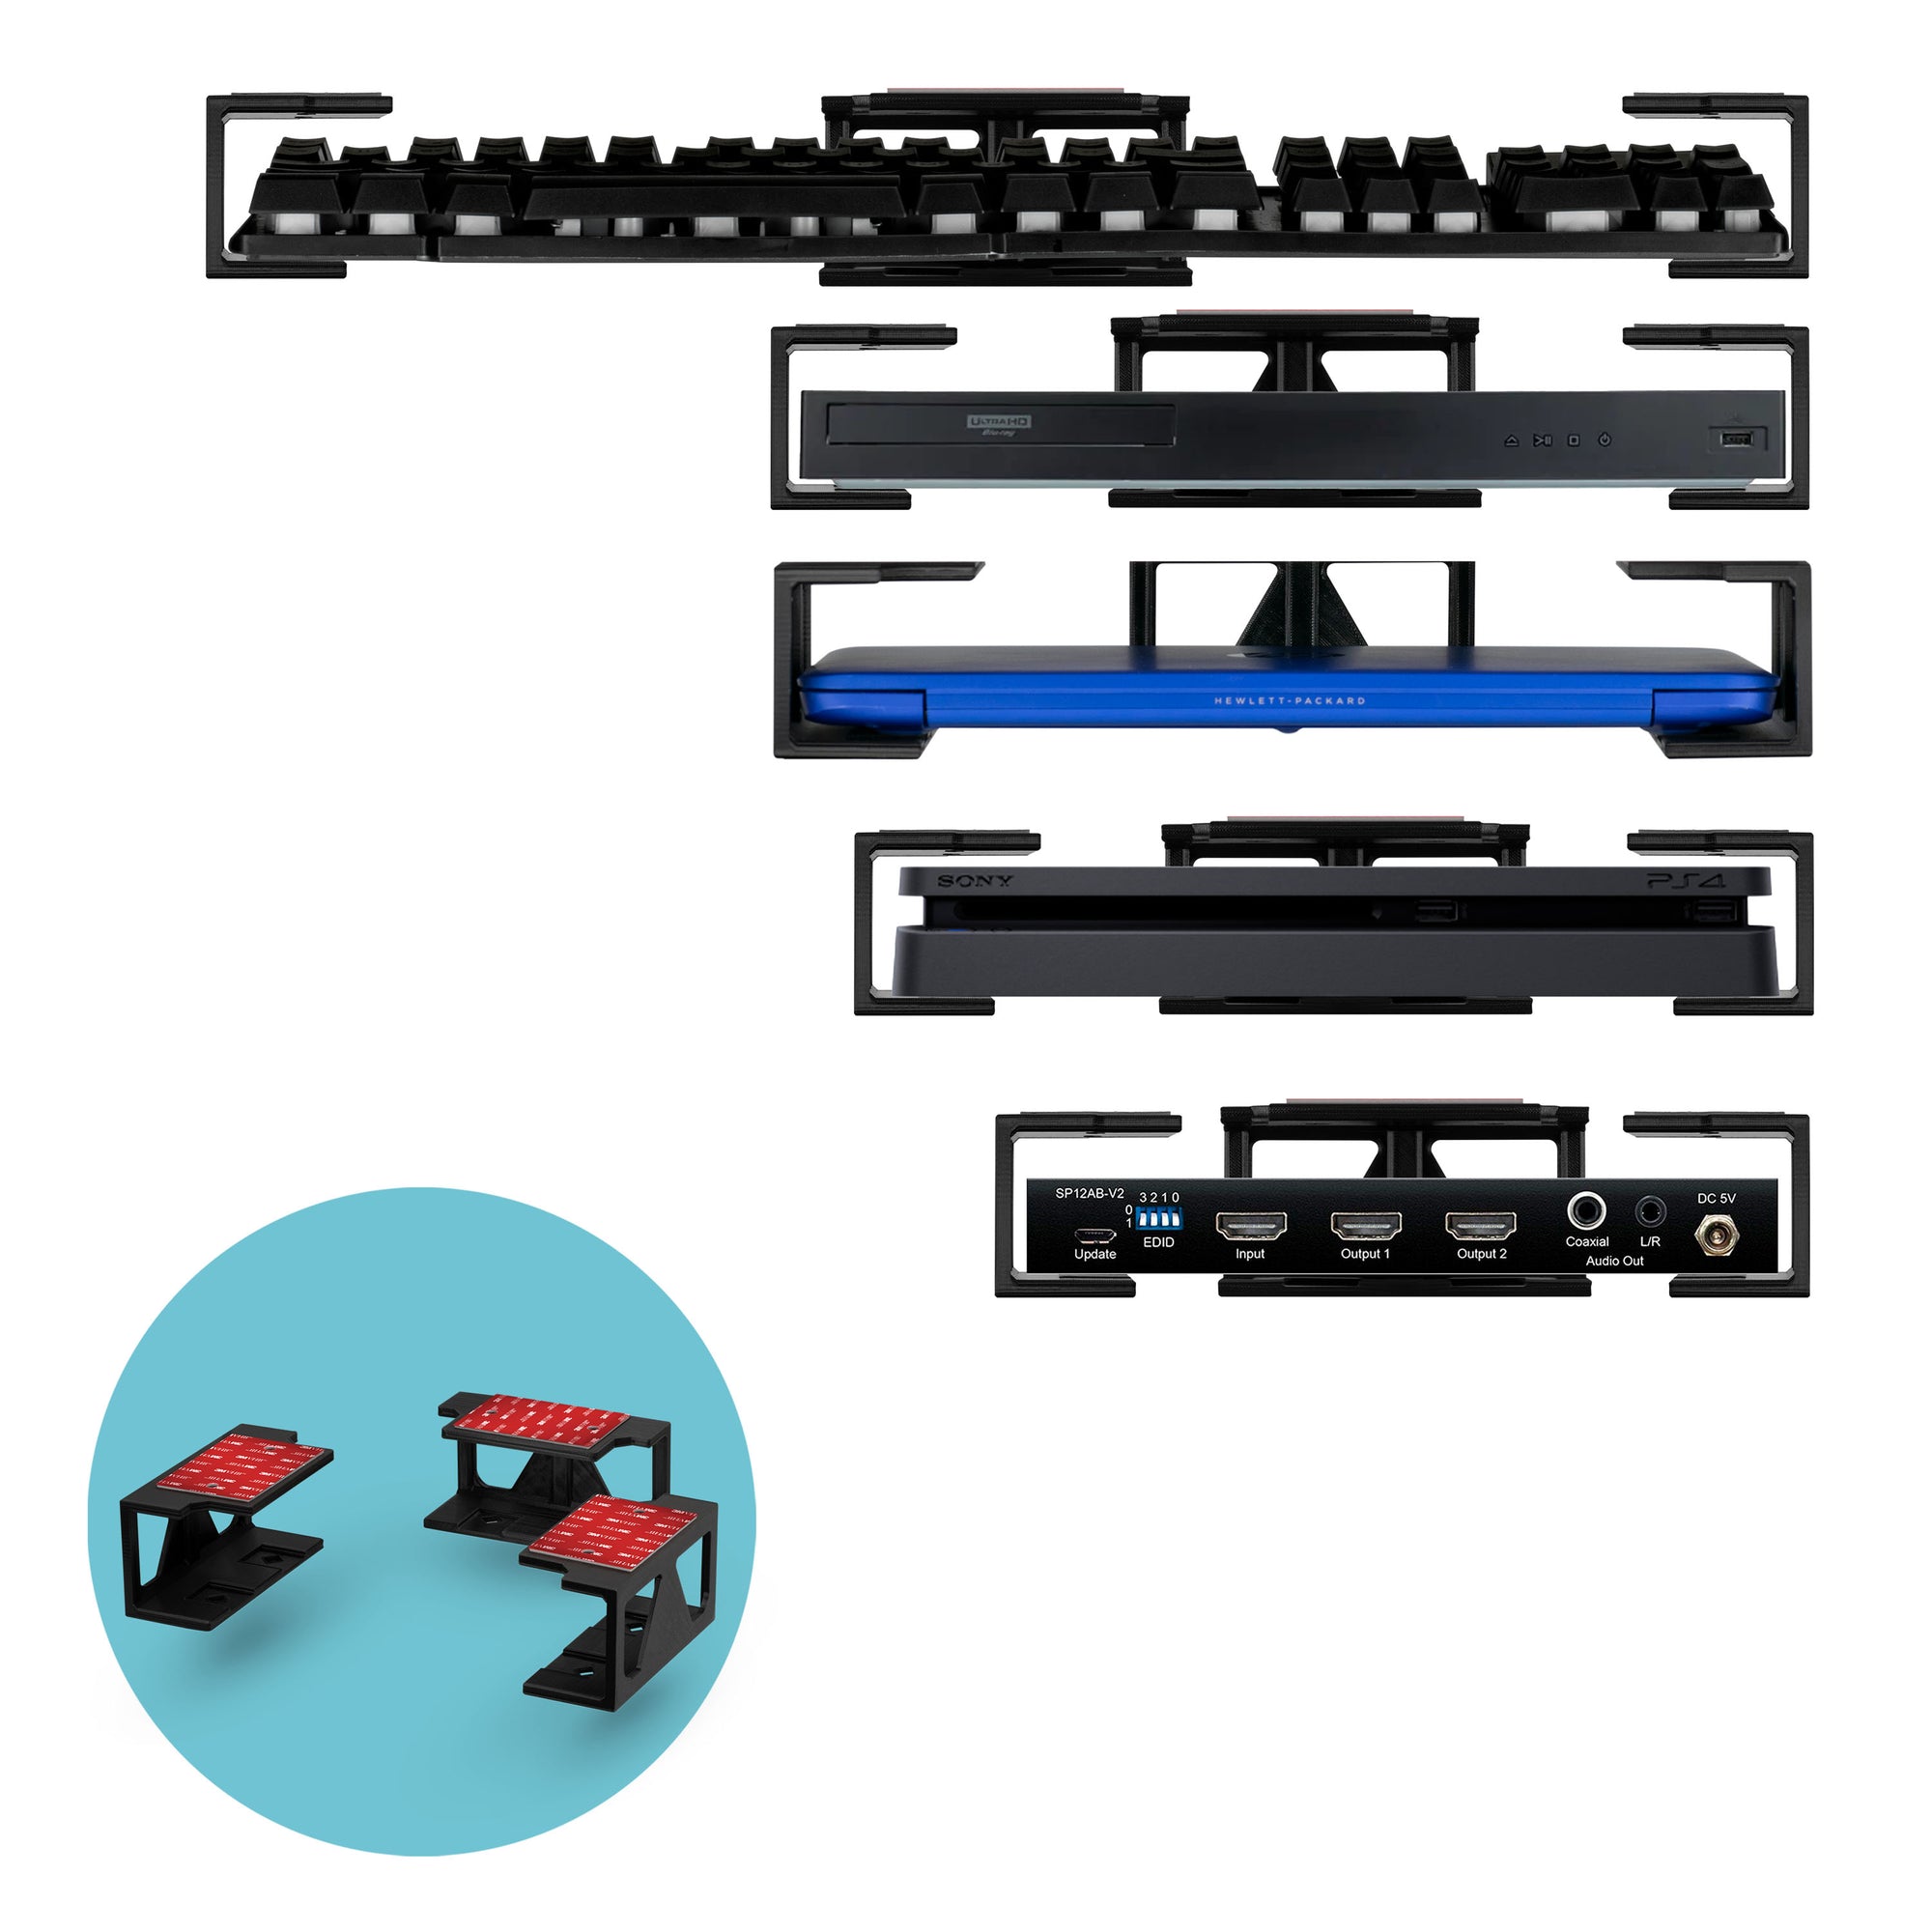 Under Desk Laptop Holder Mount with Adhesive & Screws For Devices like Laptops Macbooks Surface Keyboard Routers Modem Cable Box Network Switch & More